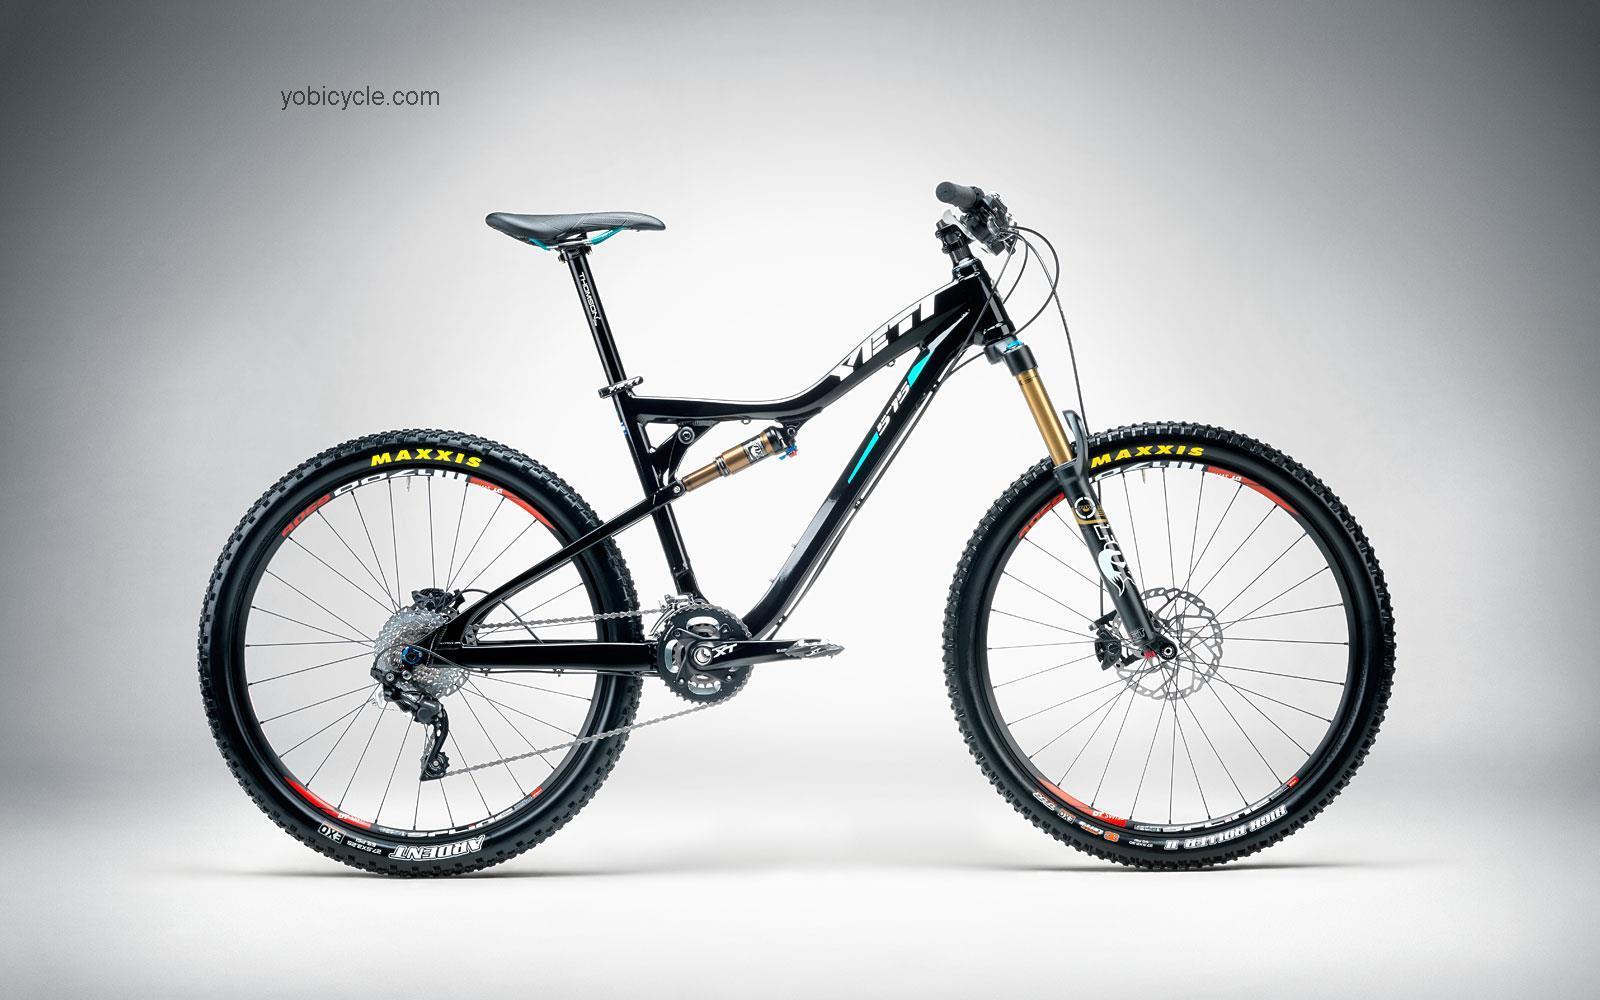 Yeti 575 XTR competitors and comparison tool online specs and performance